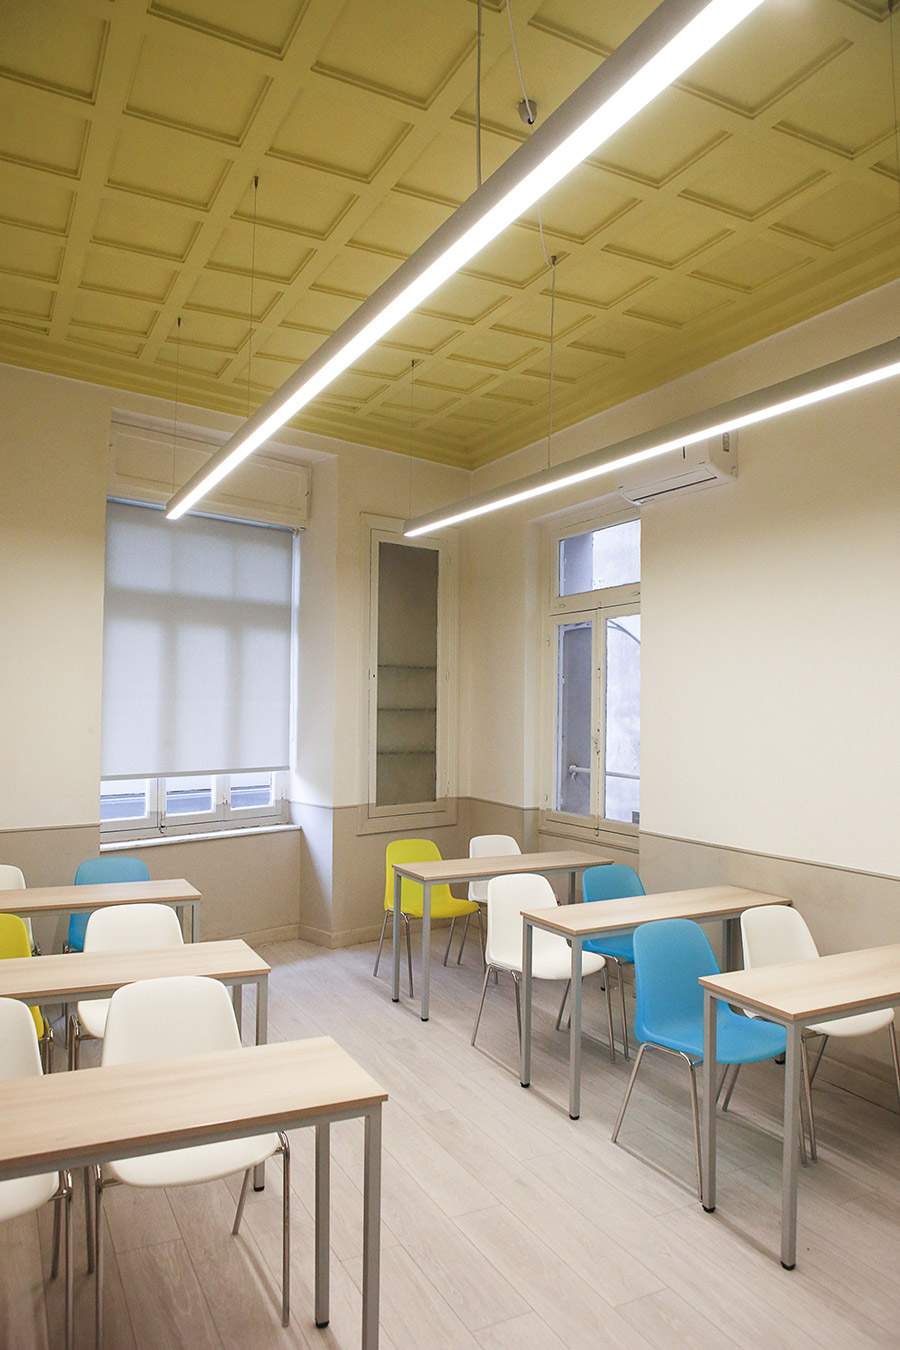 Elaborated yellow ceiling is the highlight in this classroom